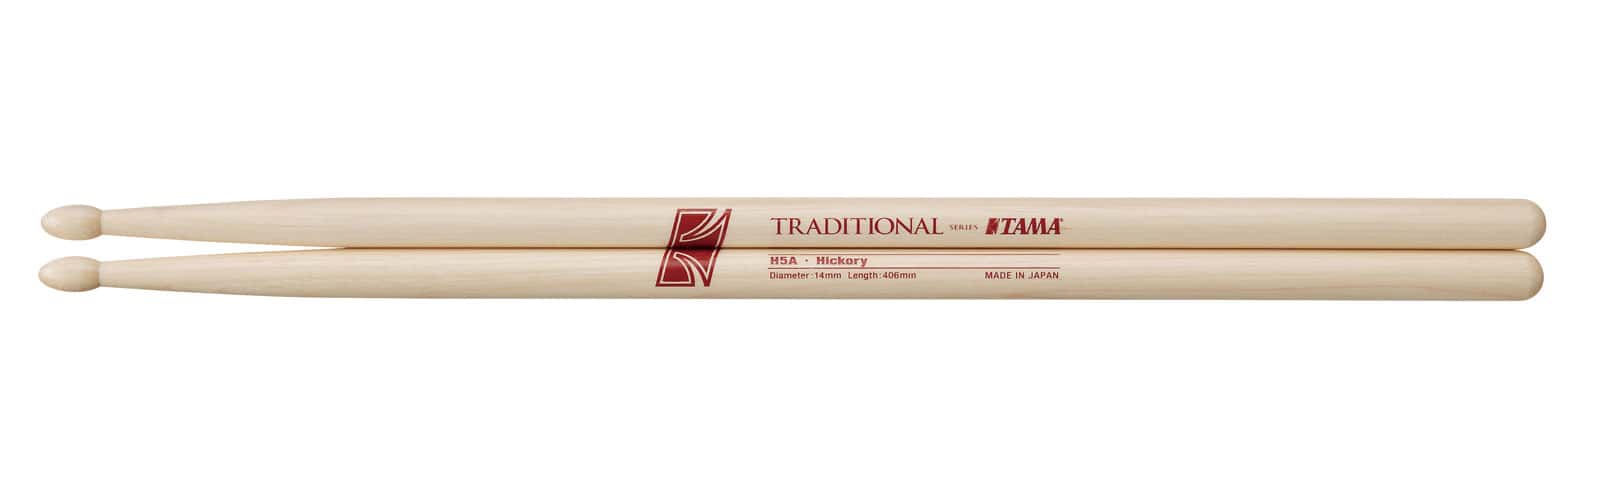 TAMA H5A - AMERICAN HICKORY TRADITIONAL D14MM X L406MM